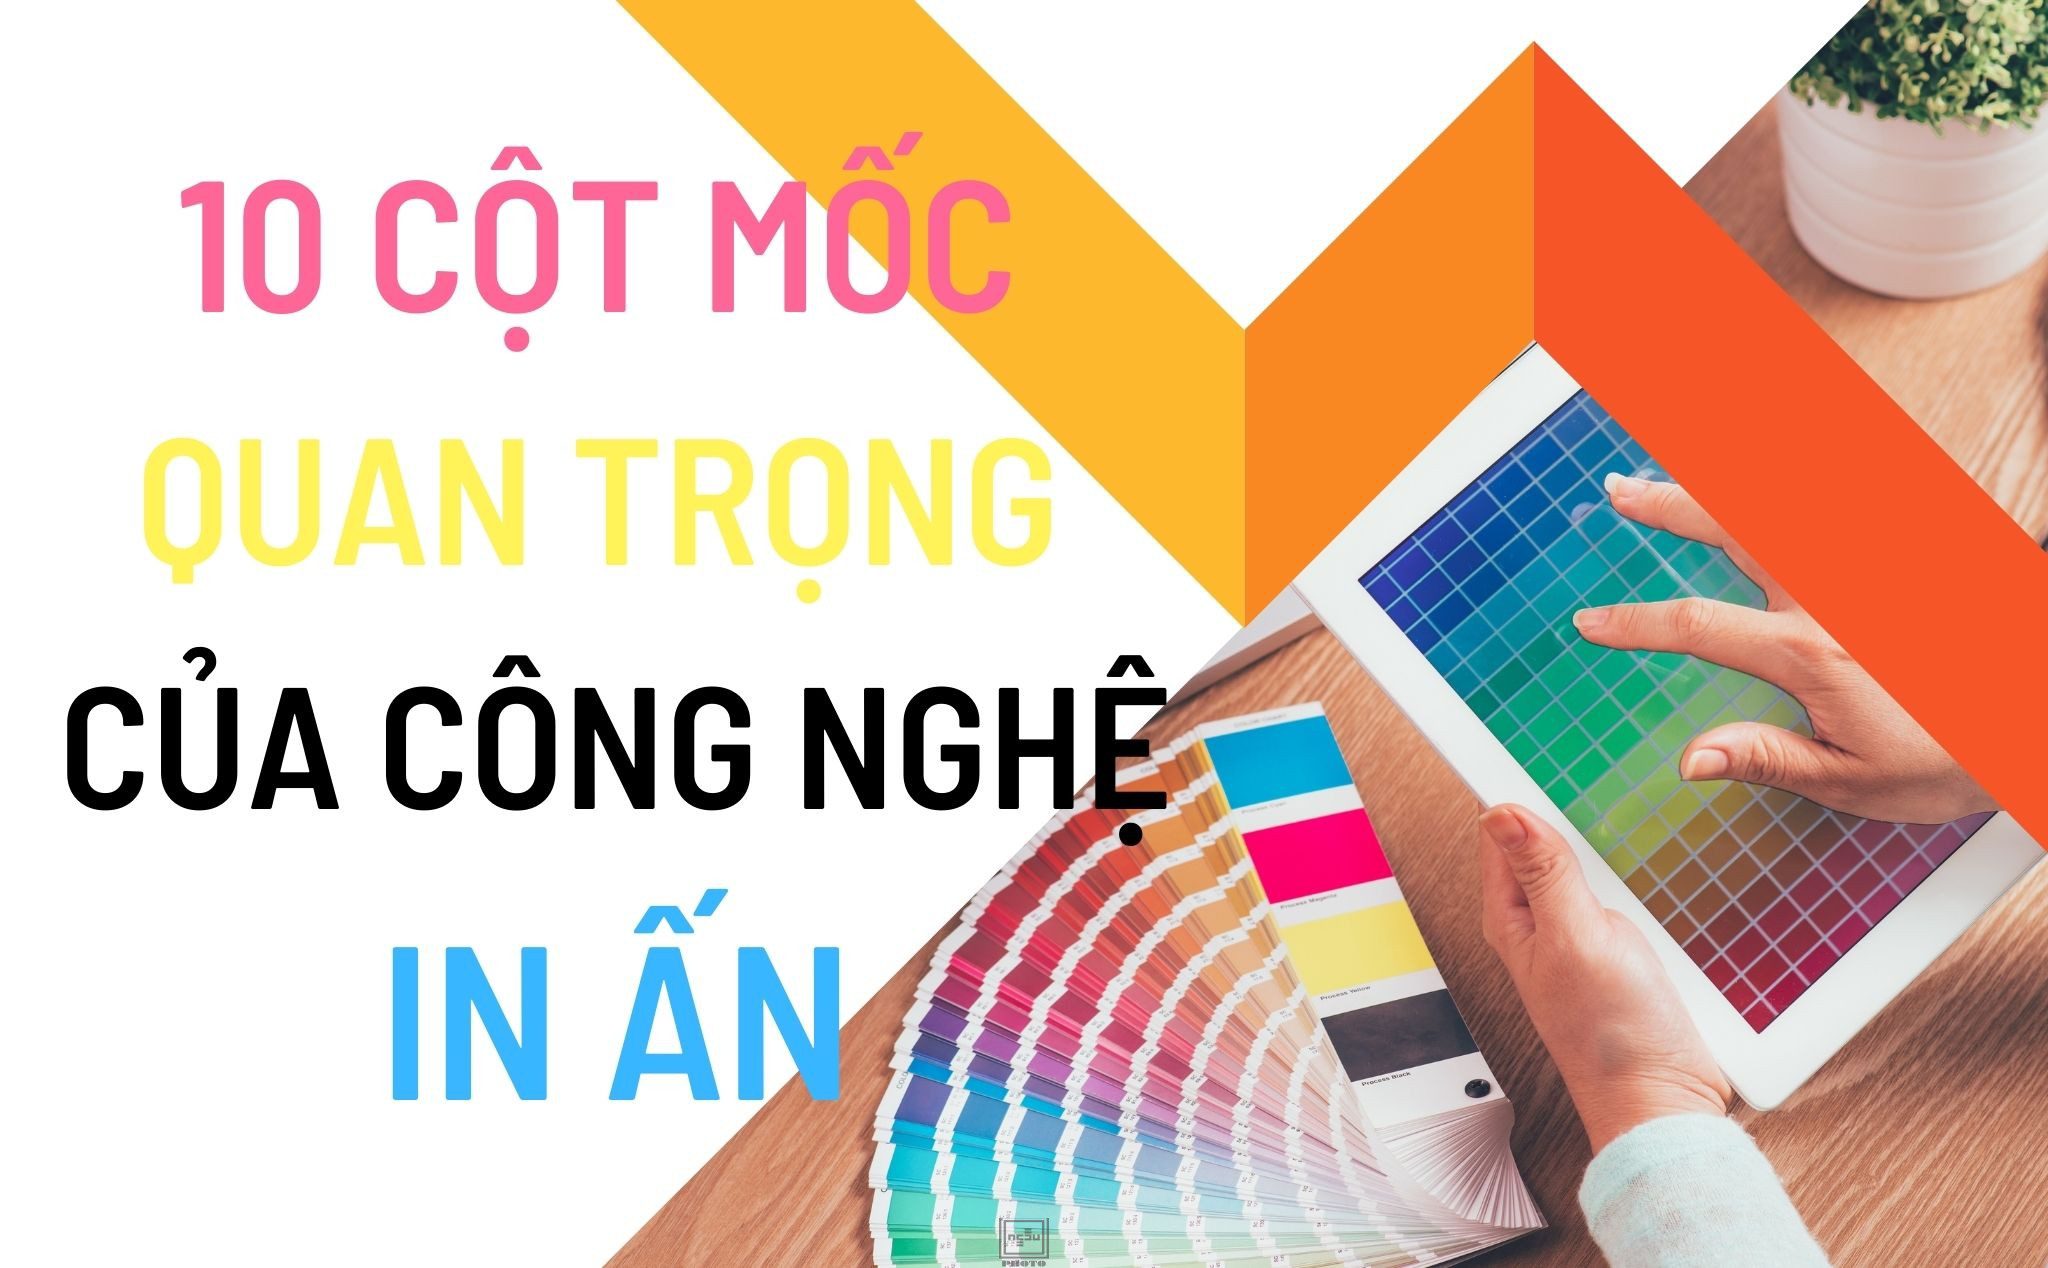 cot moc in anh